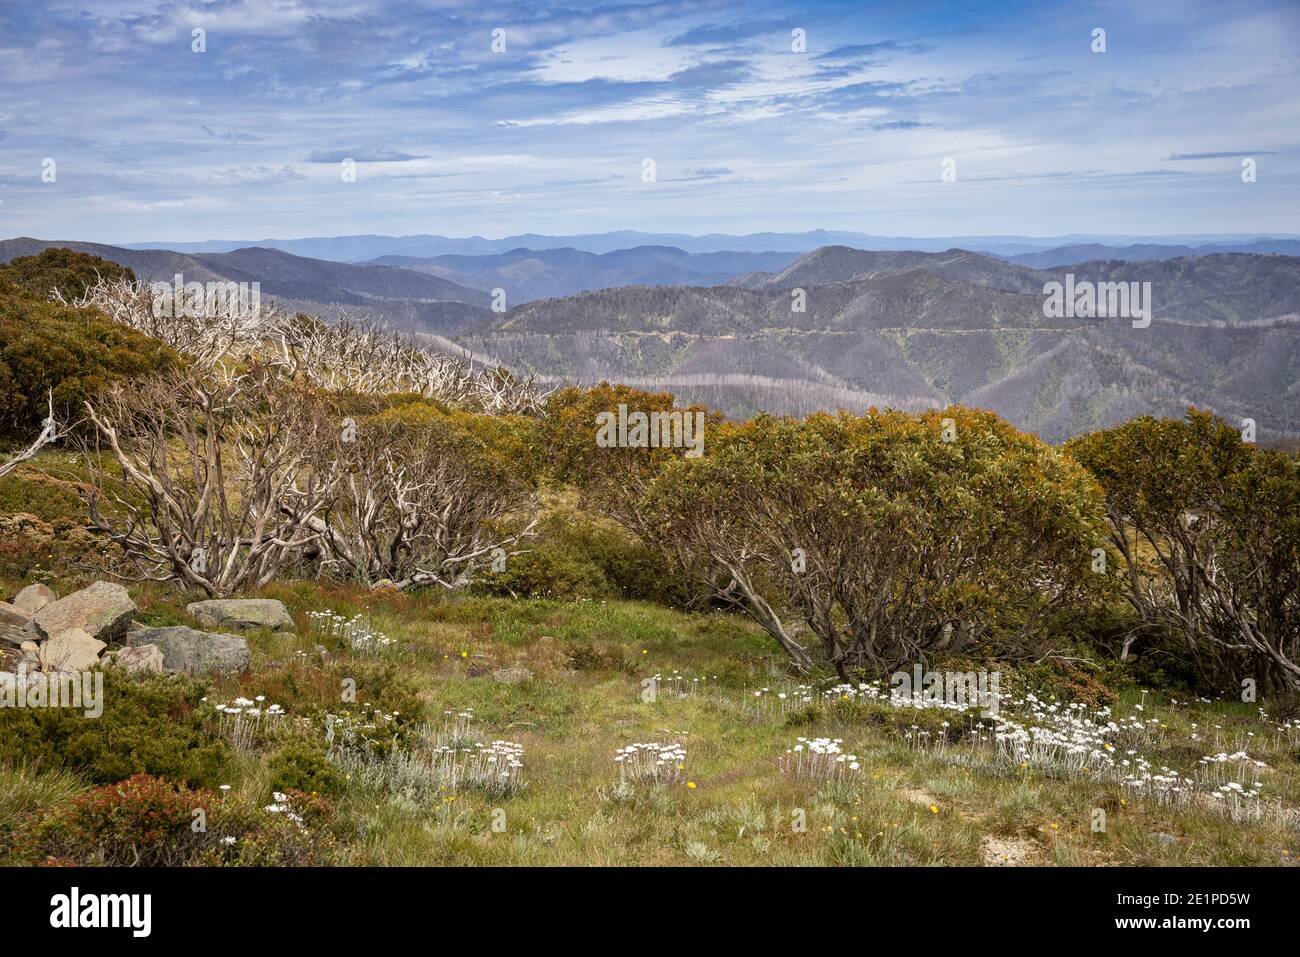 View of summer flowers and snow gums near Dinner Plain, Victoria, Australia Stock Photo